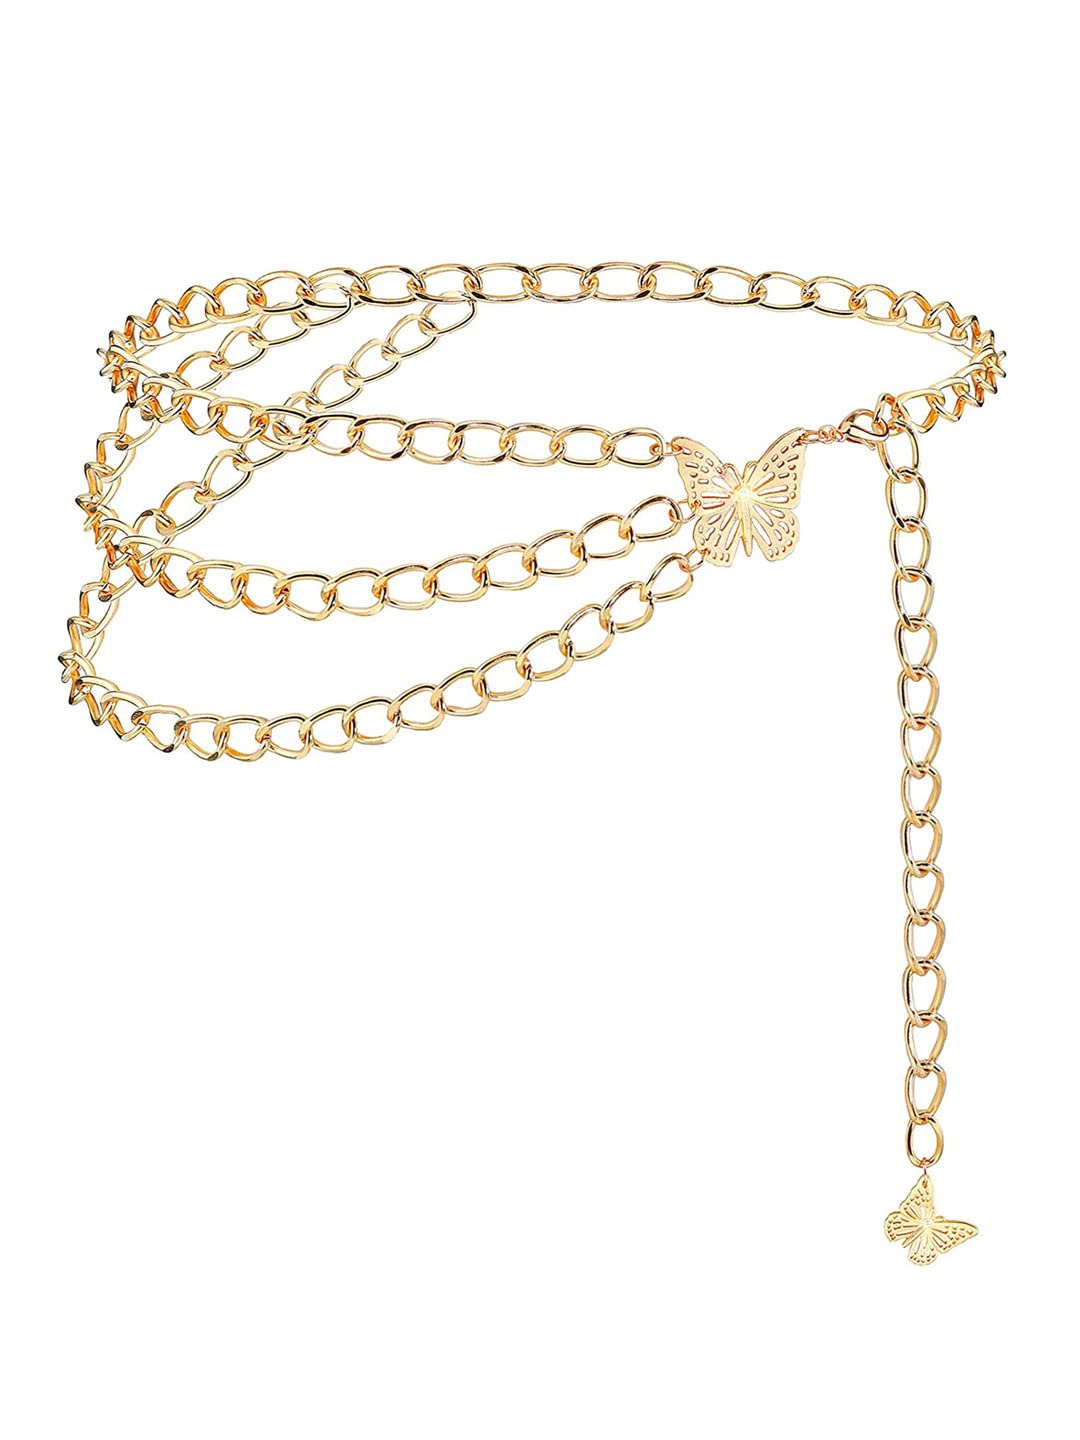 Yellow Chimes Waist Chain For Women Multilayer Gold Plated Belly Chain Waist Belt For Women and Girls